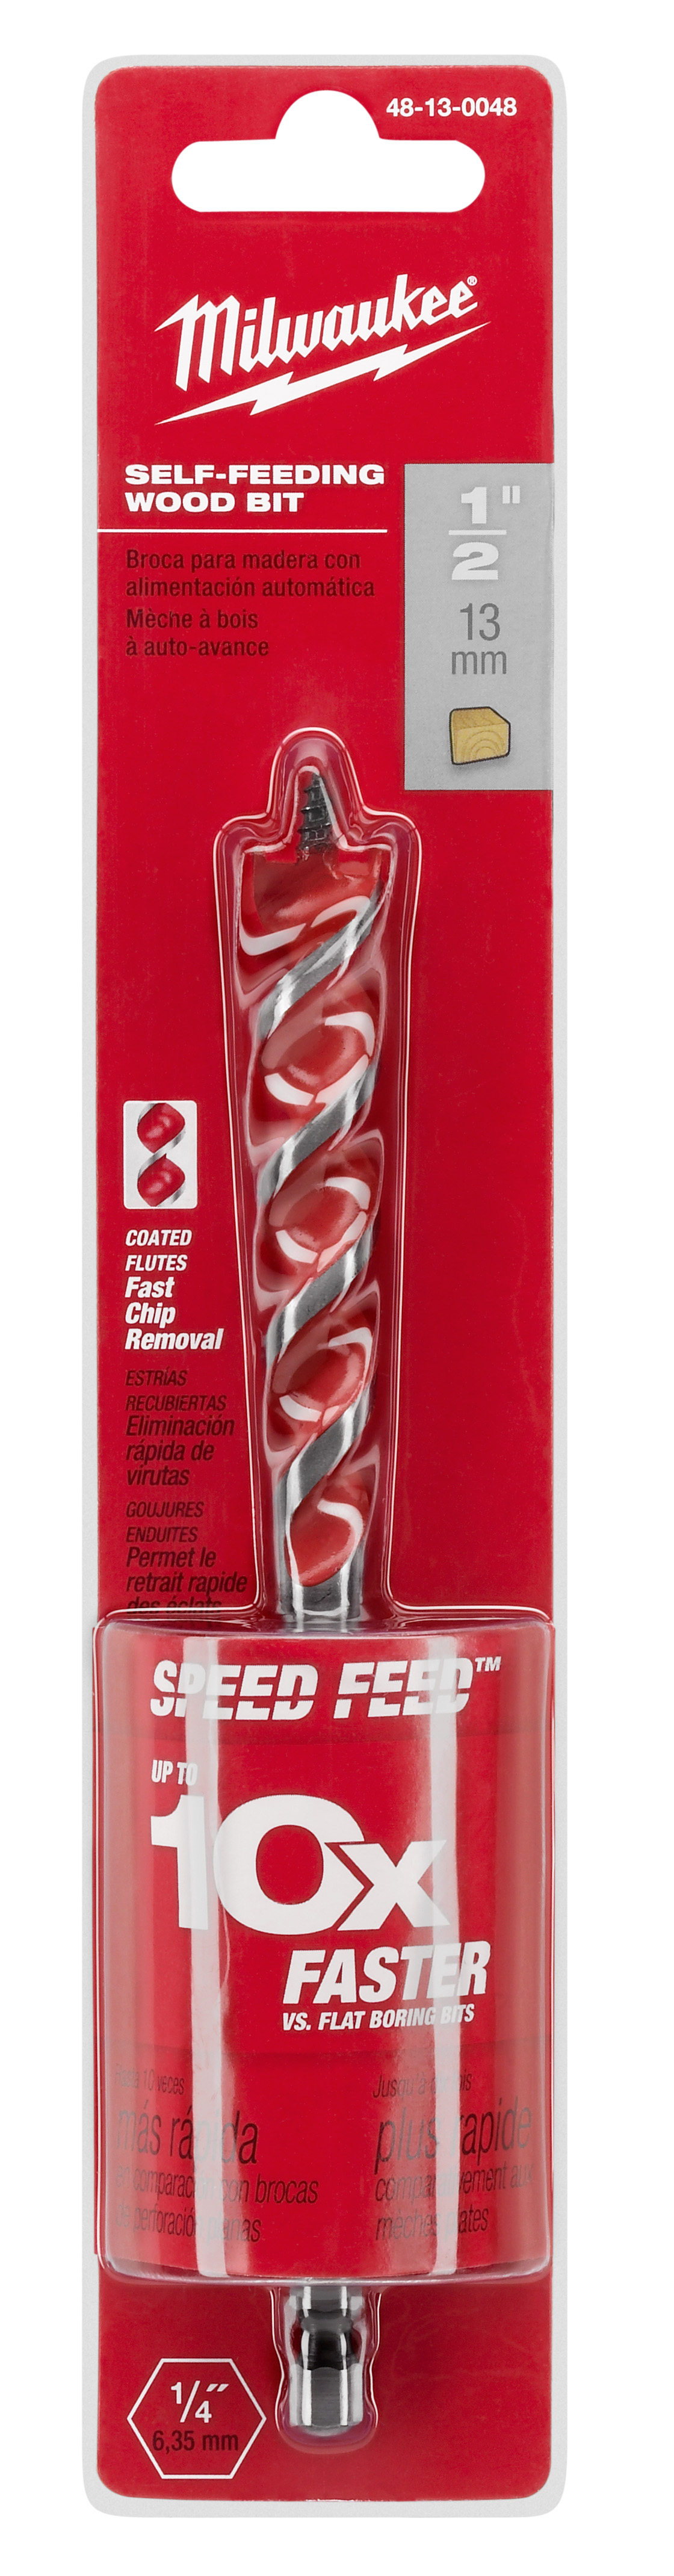 Milwaukee® 1/2 in. x 6 in. SPEED FEED™ wood bits let you drill up to 10X faster than flat boring bits. These self-feeding wood bits feature double wing spurs for drilling fast holes in clean wood. The feed screw and dual cutting edges permit fast cutting of clean holes that are ideal for feeding wire or bolts.